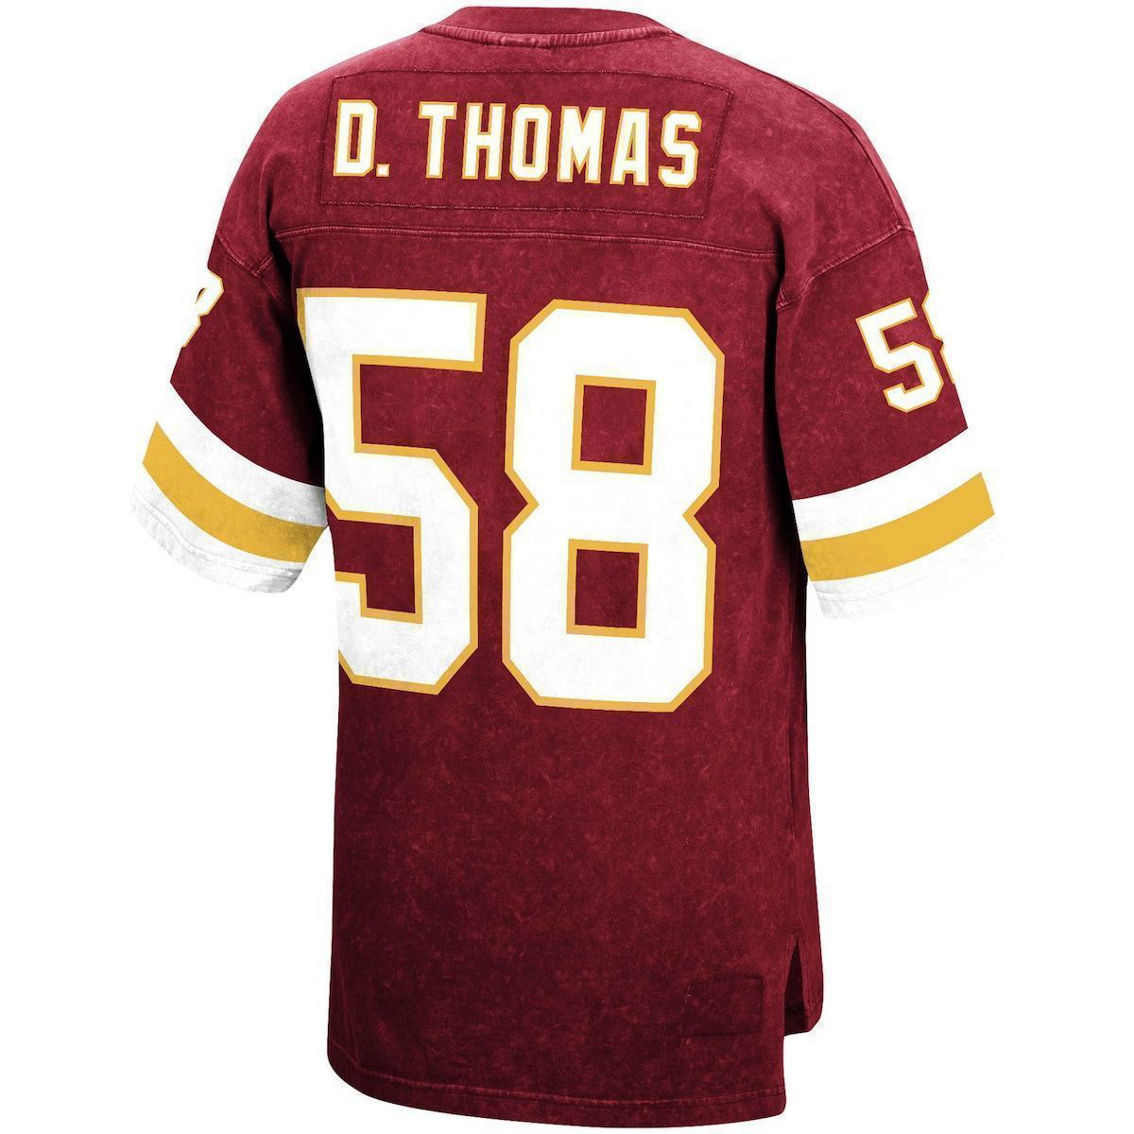 Mitchell & Ness Men's Derrick Thomas Red Kansas City Chiefs Retired Player Name & Number Acid Wash Top - Image 4 of 4